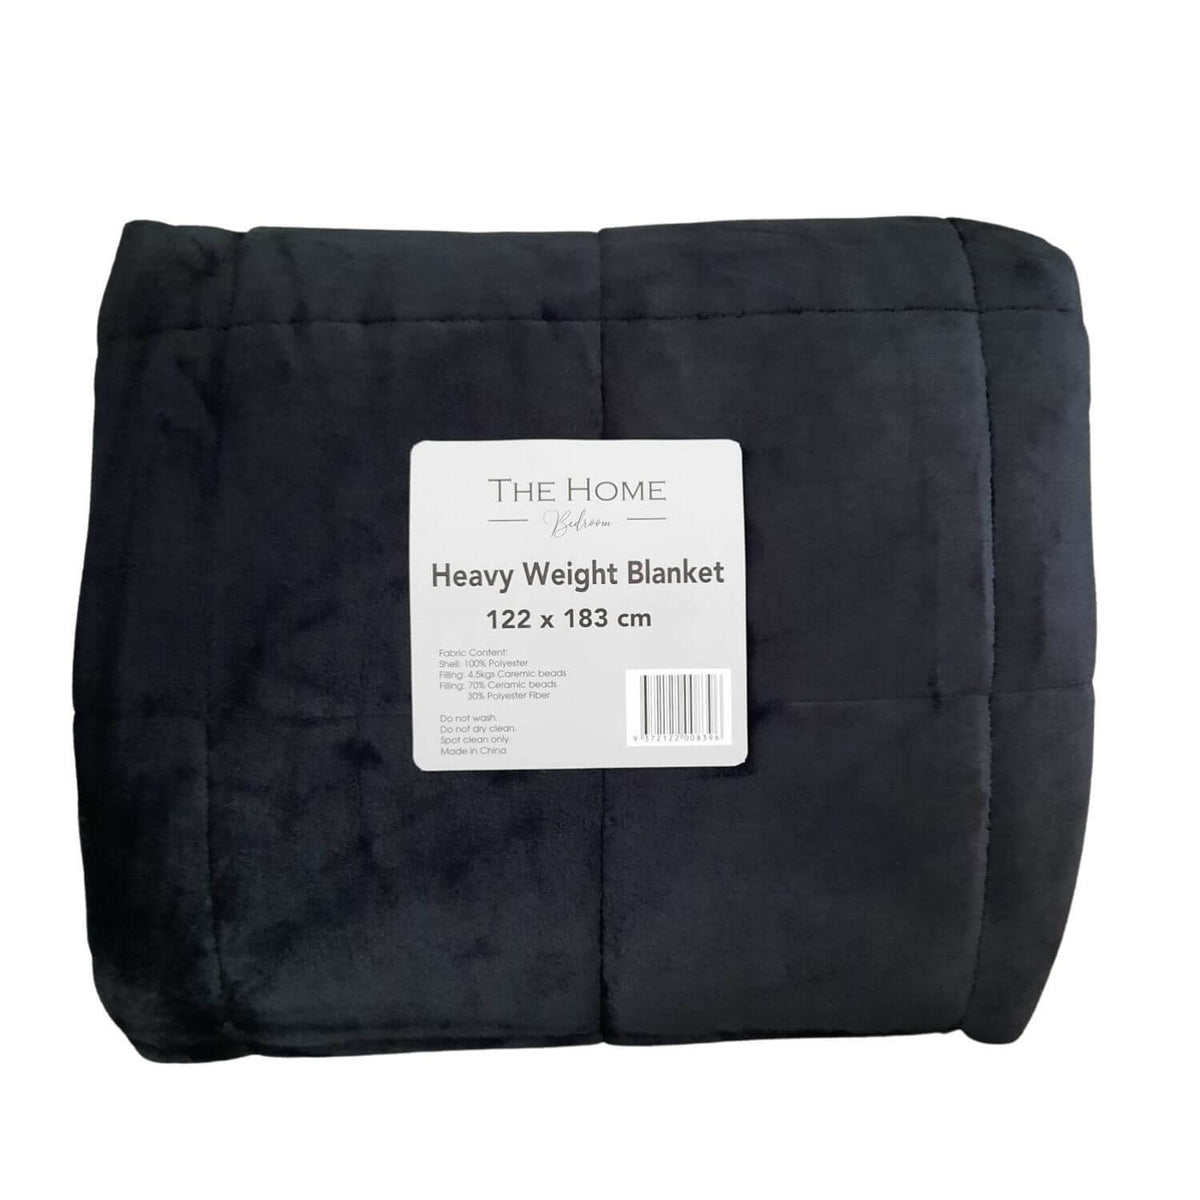 Weighted Blanket - 4Kg